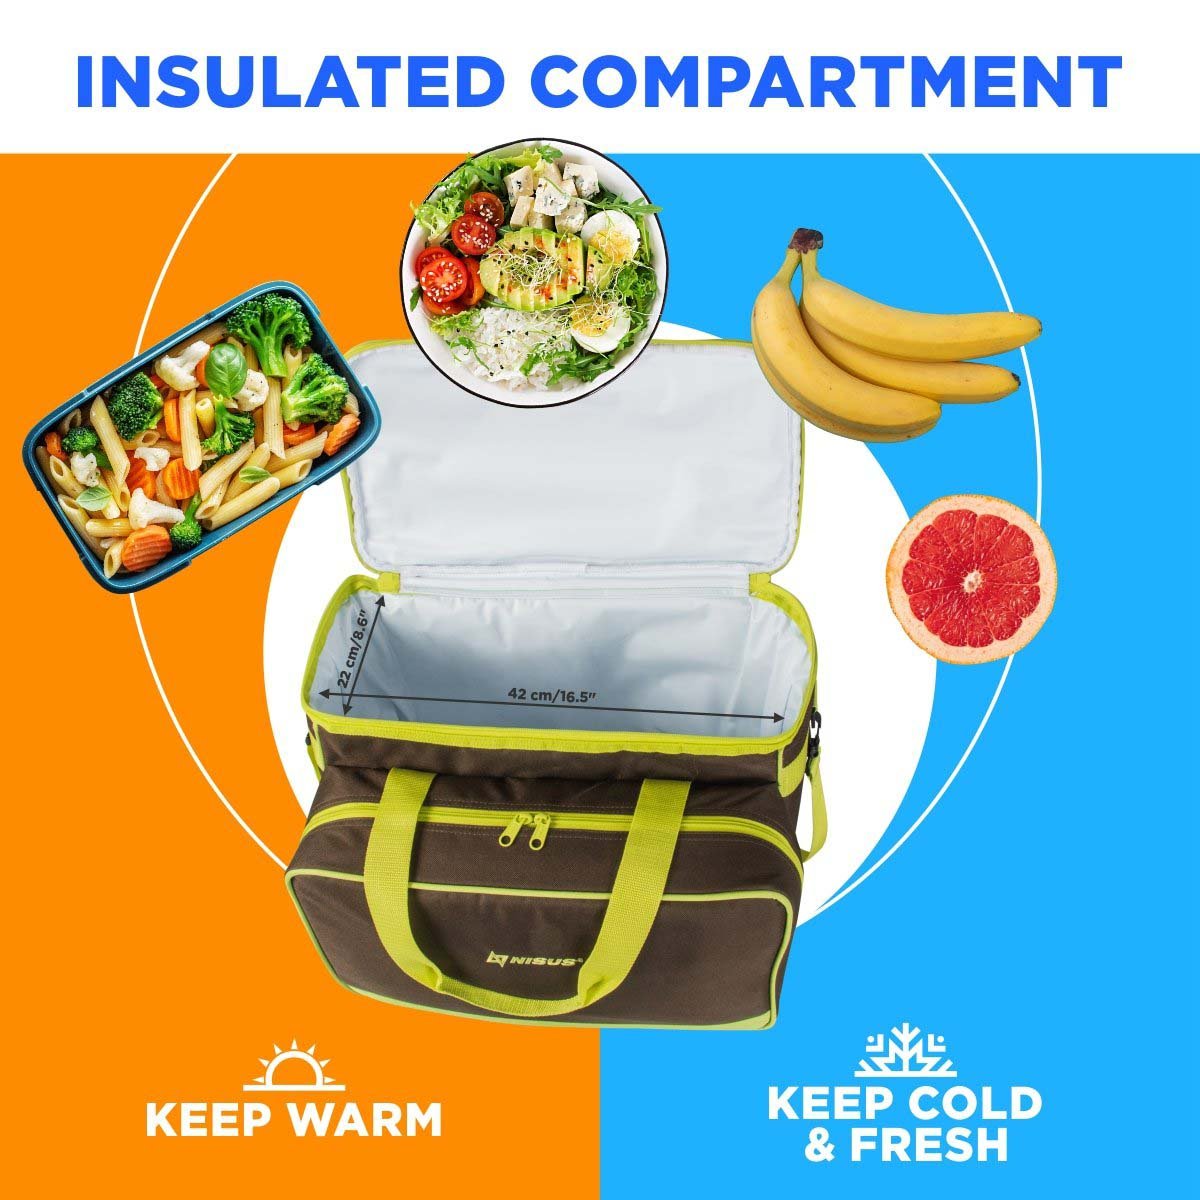 Nisus Insulated Picninc Bag keeps your food and beverage hot or fresh - depending on what you need